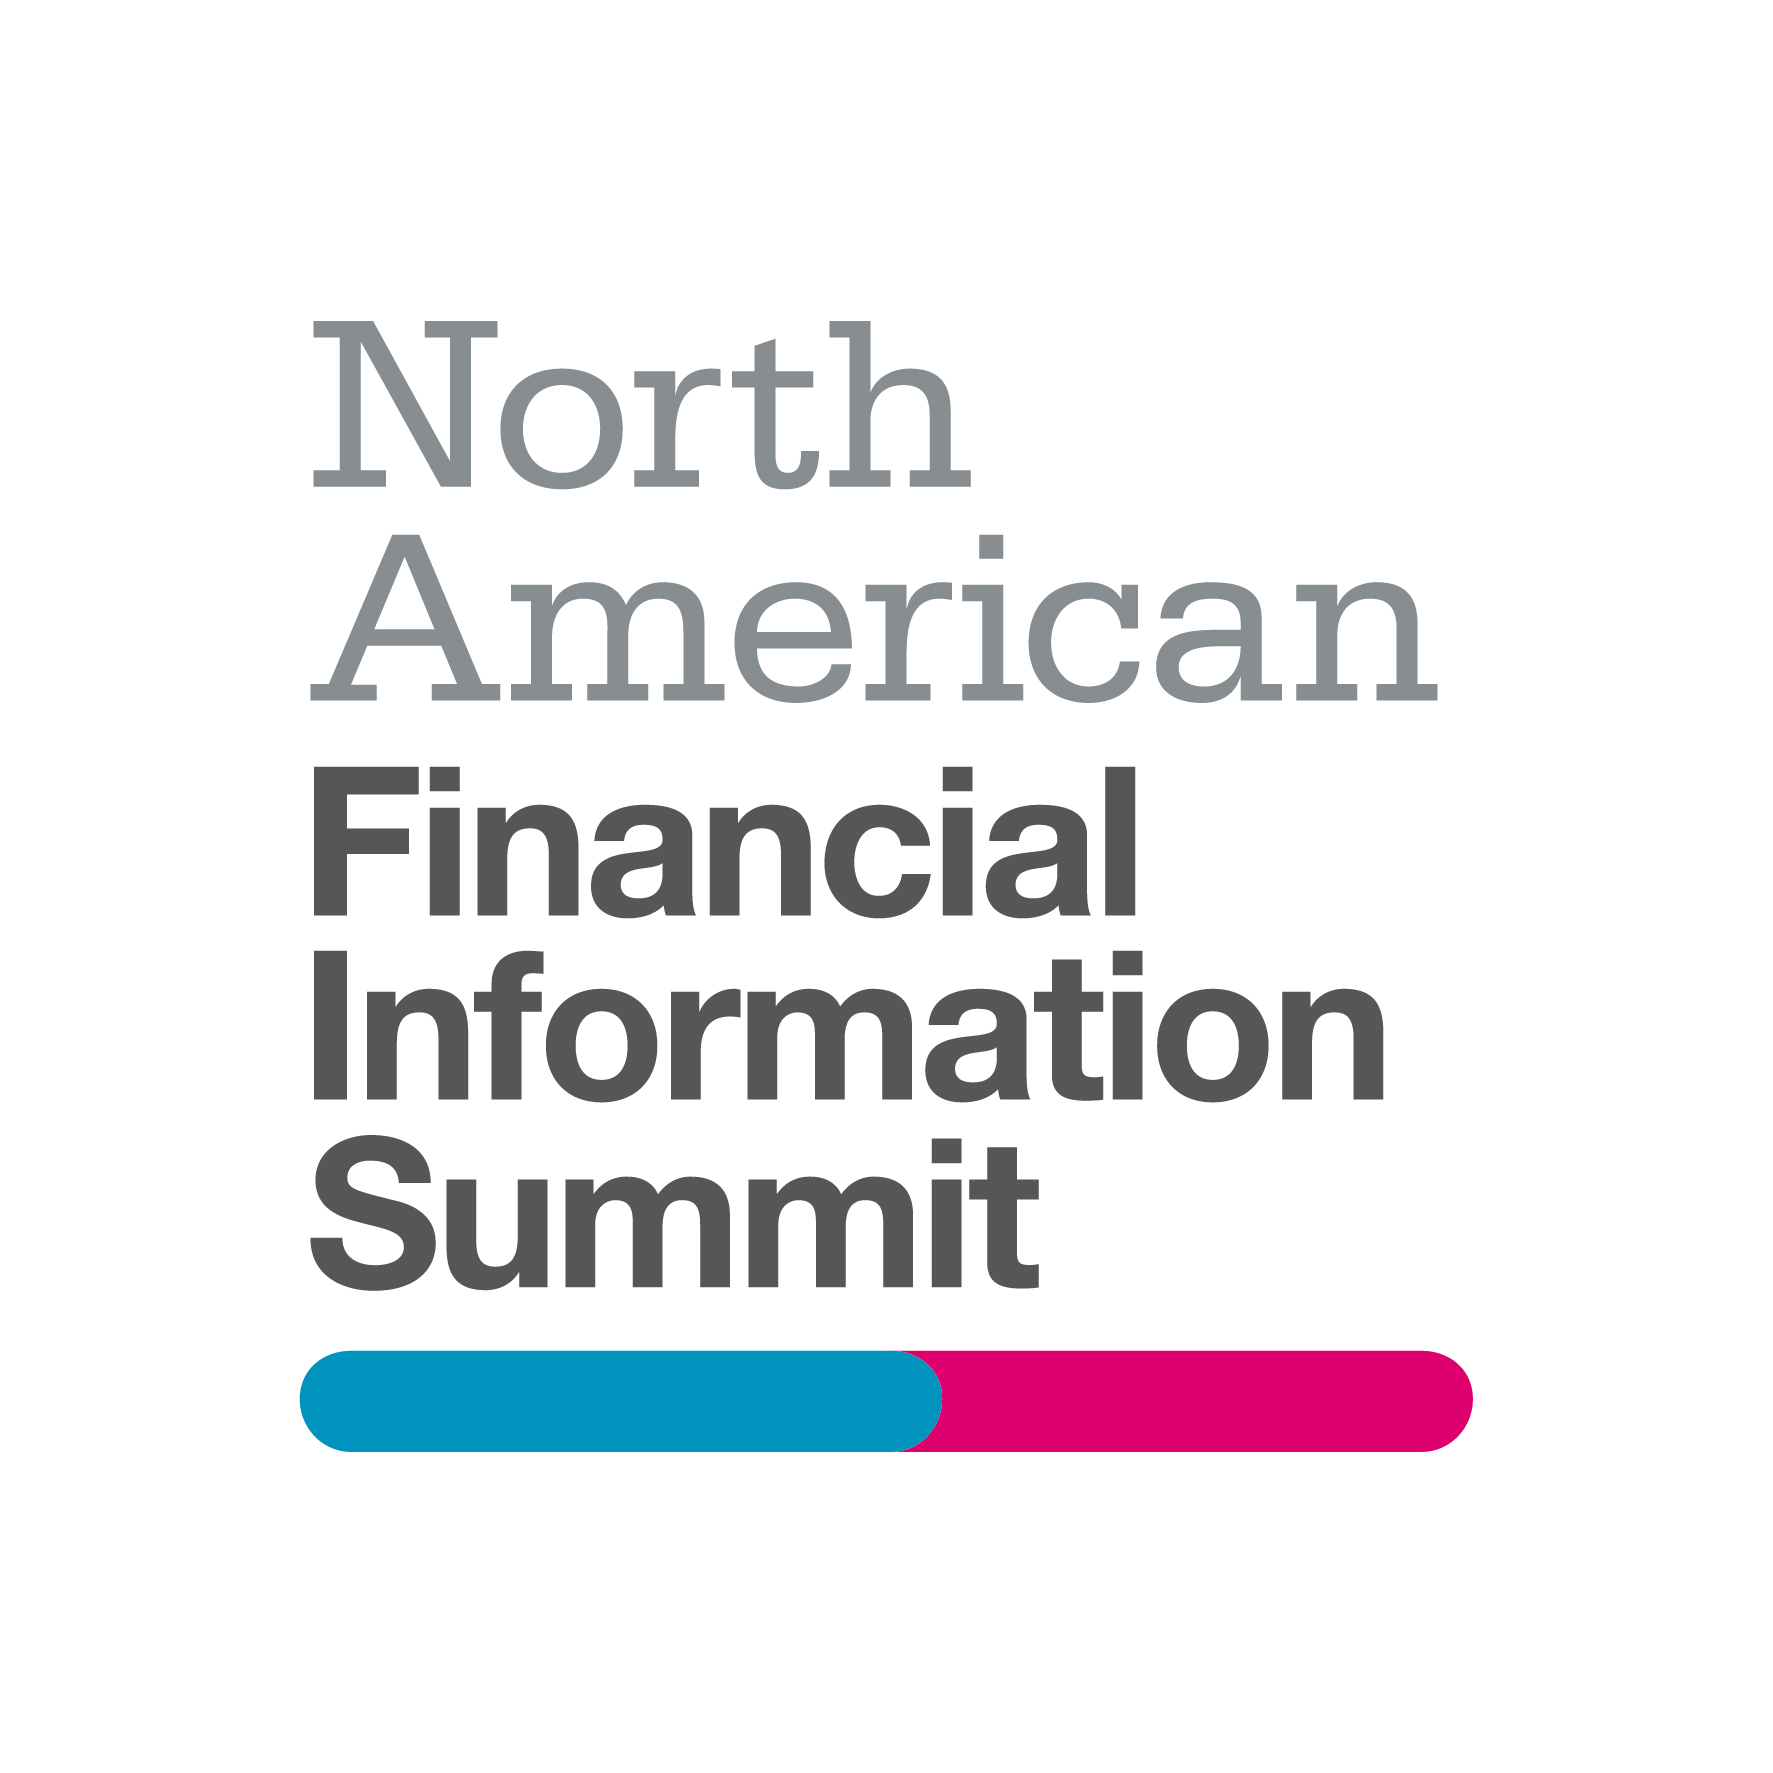 North American Financial Information Summit 2020 organized by WatersTechnology